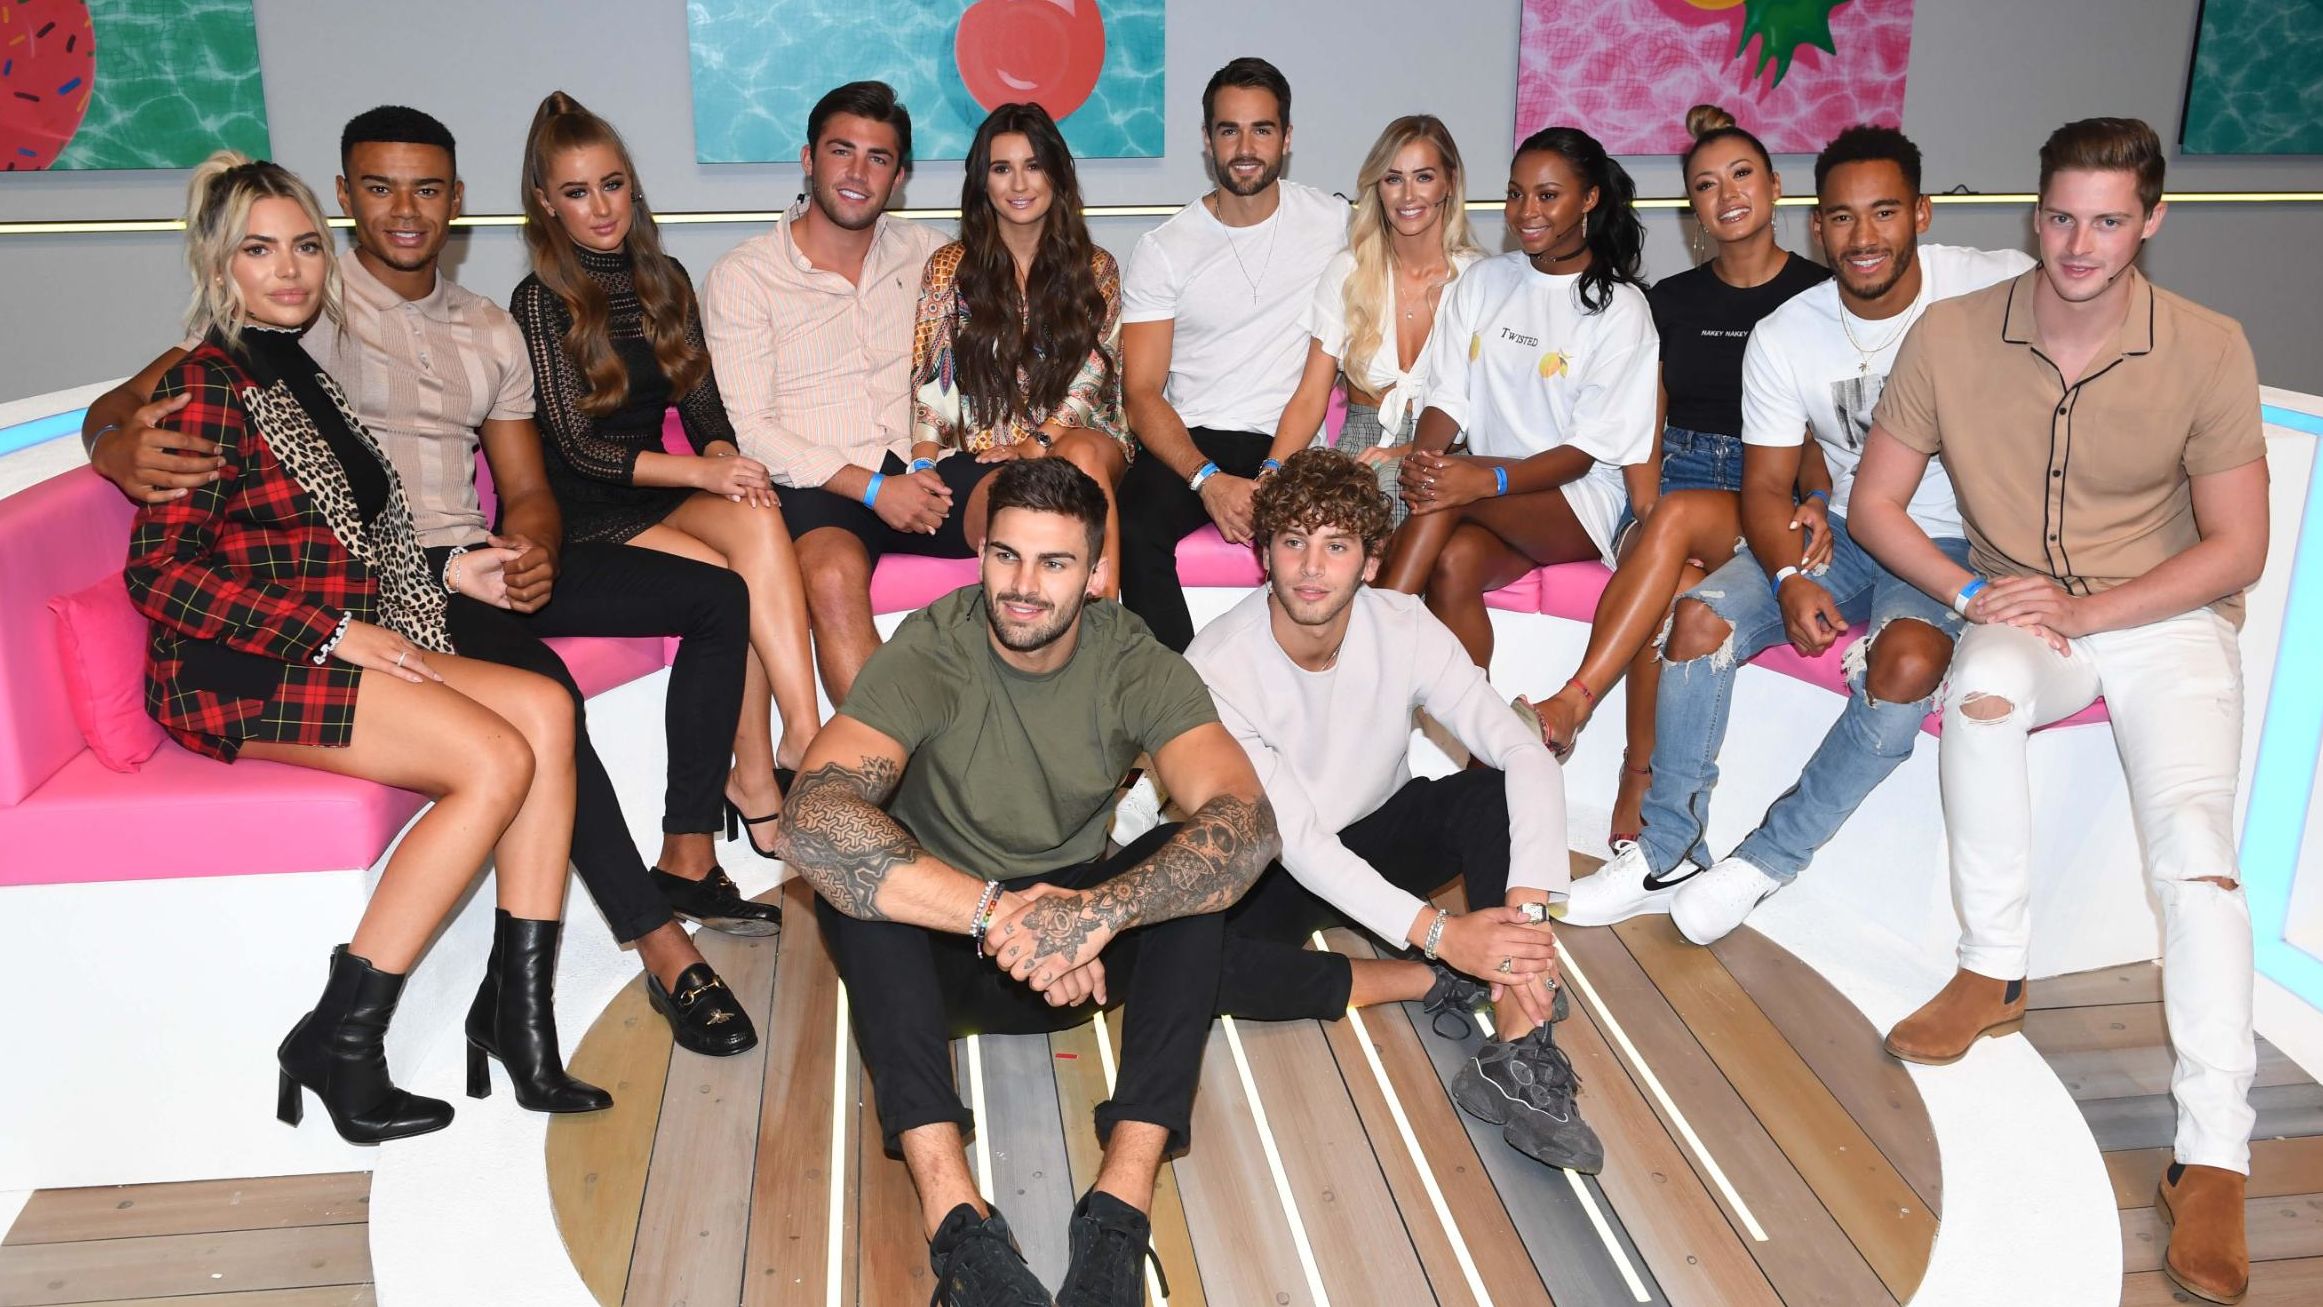 The cast of last year's "Love Island."